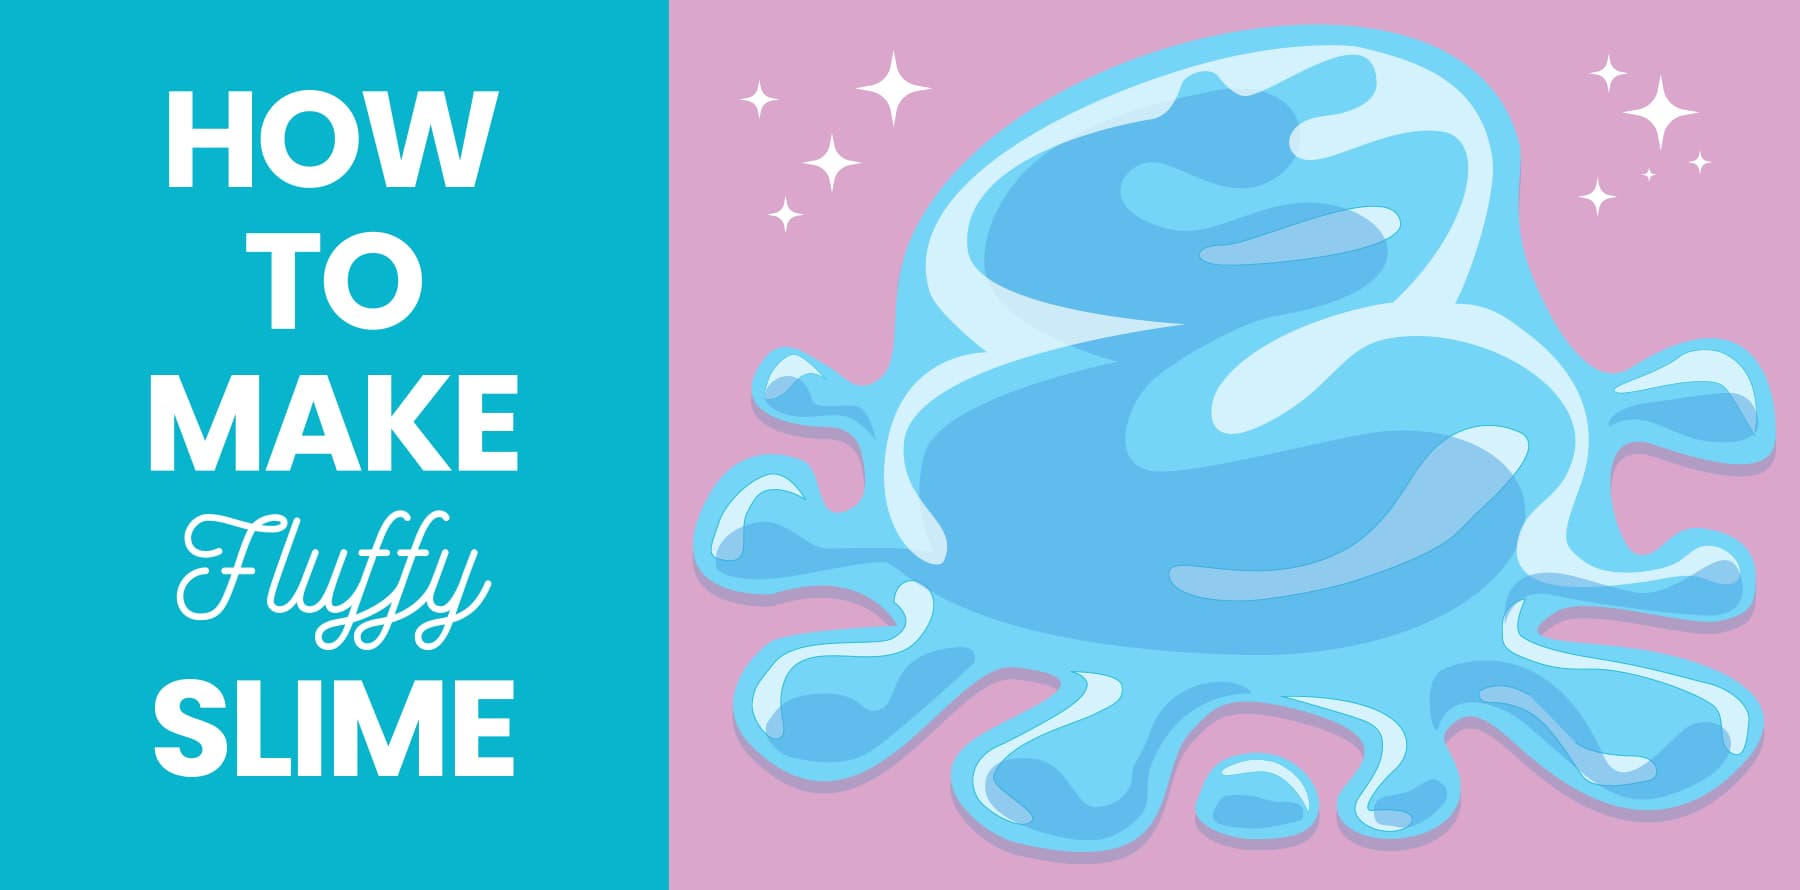 Make Your Own Slime: Book and Kit